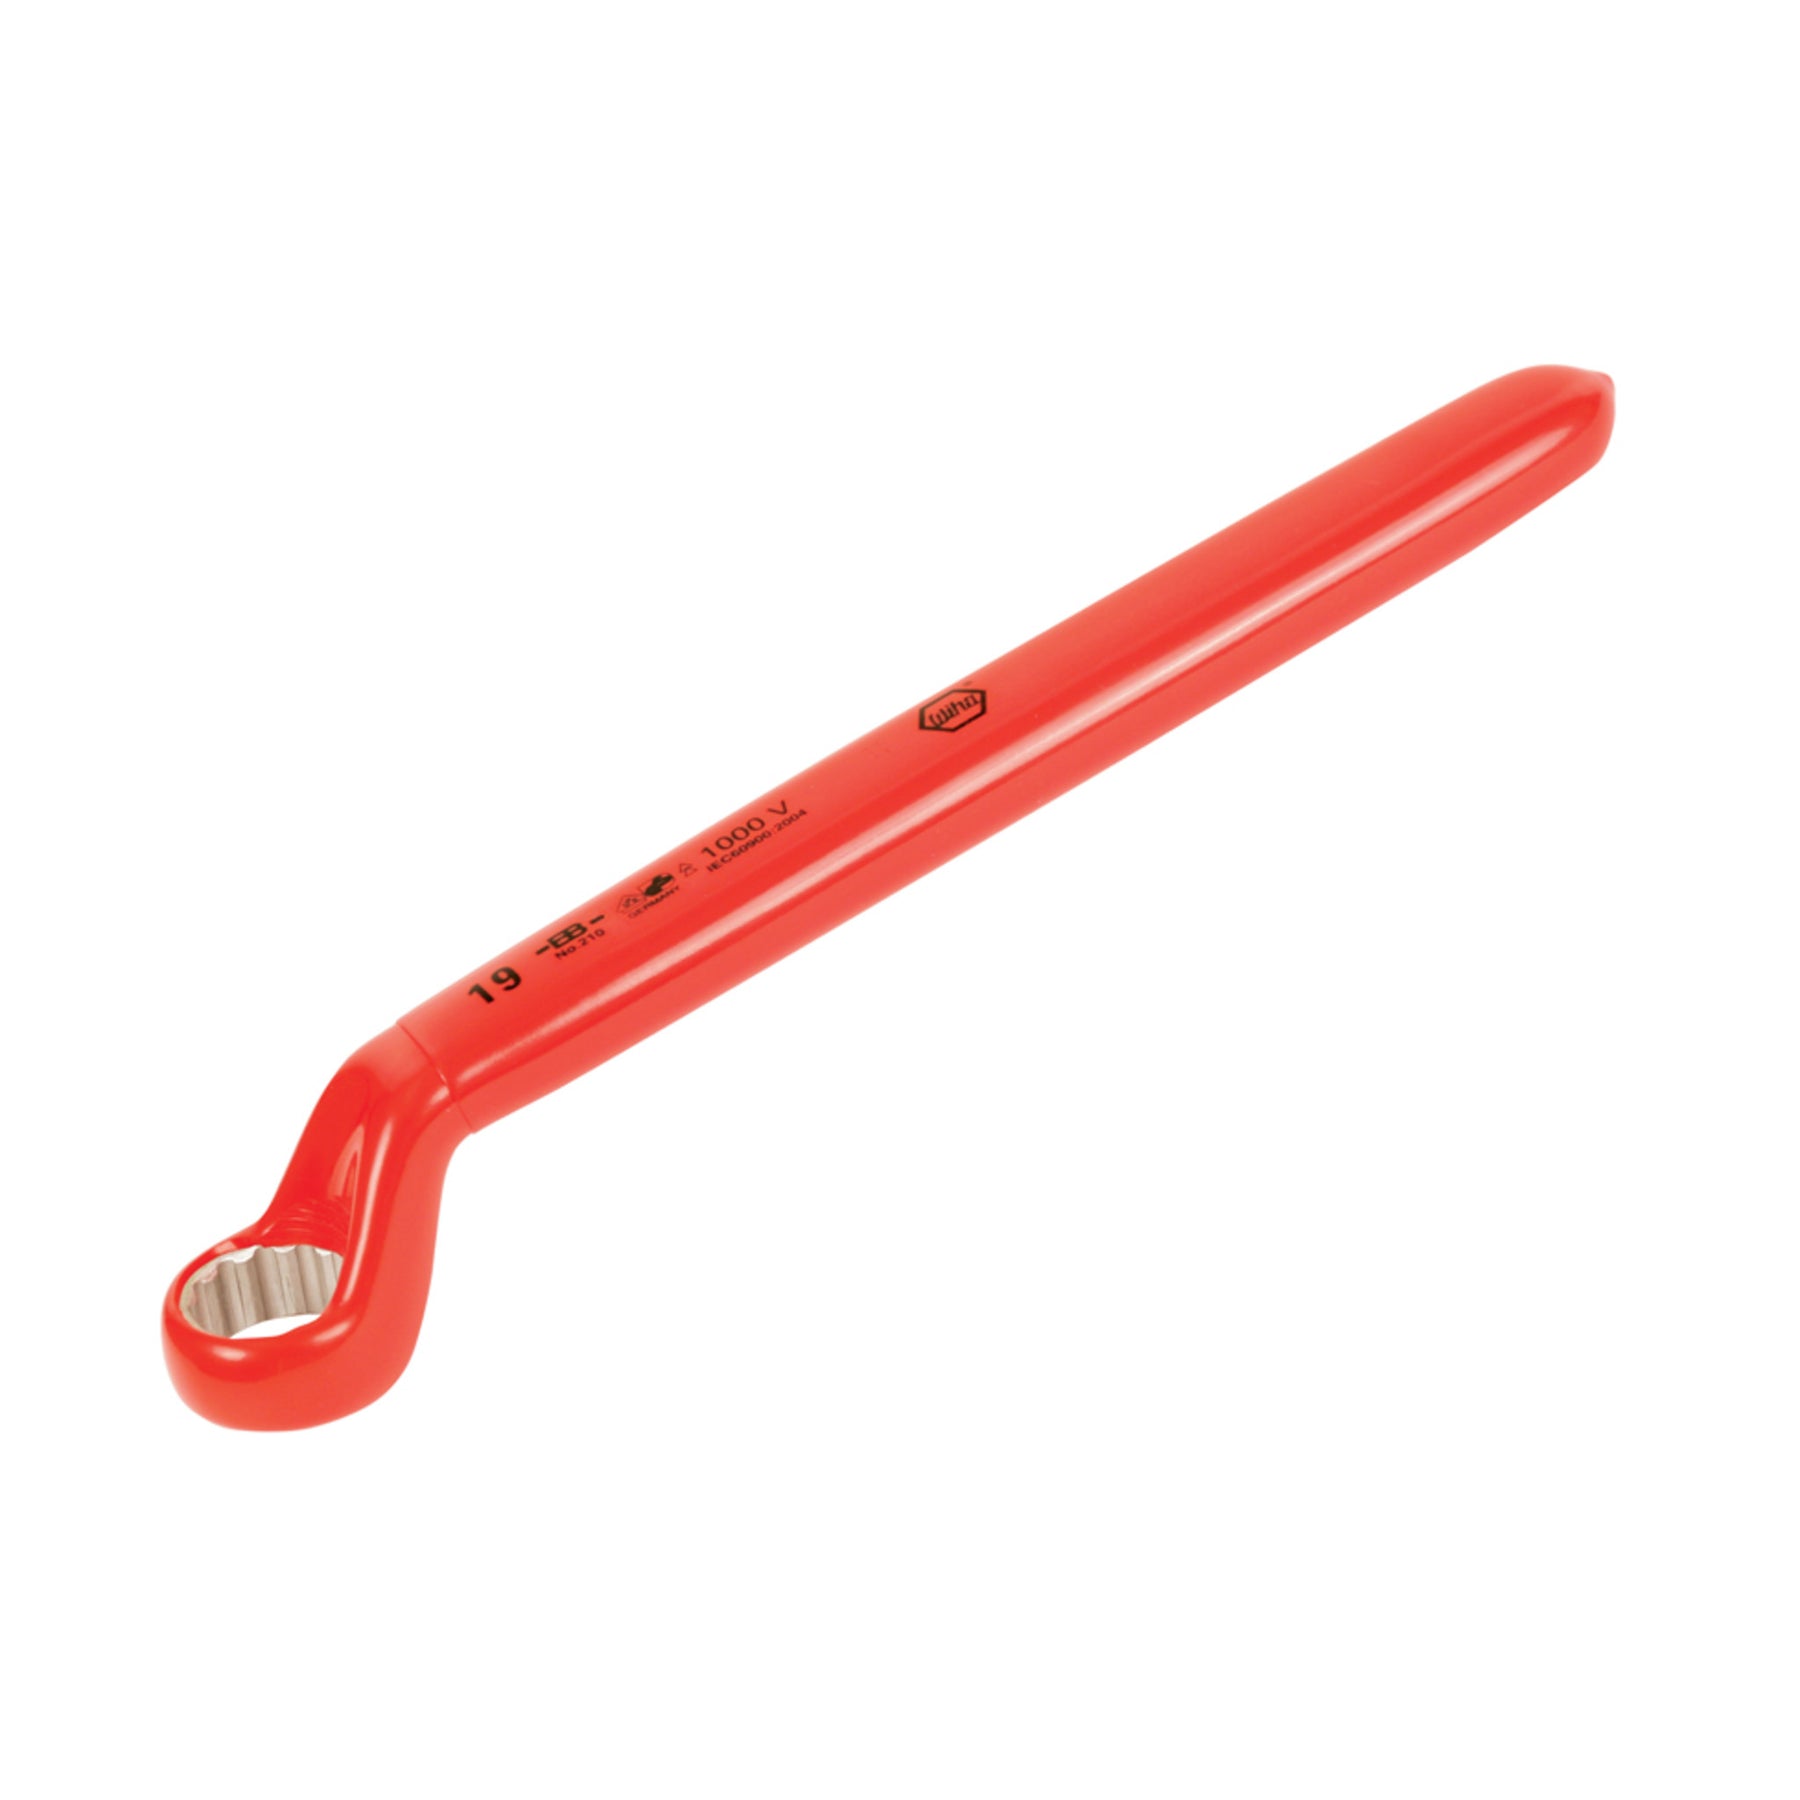 Insulated Deep Offset Wrench 5/16"